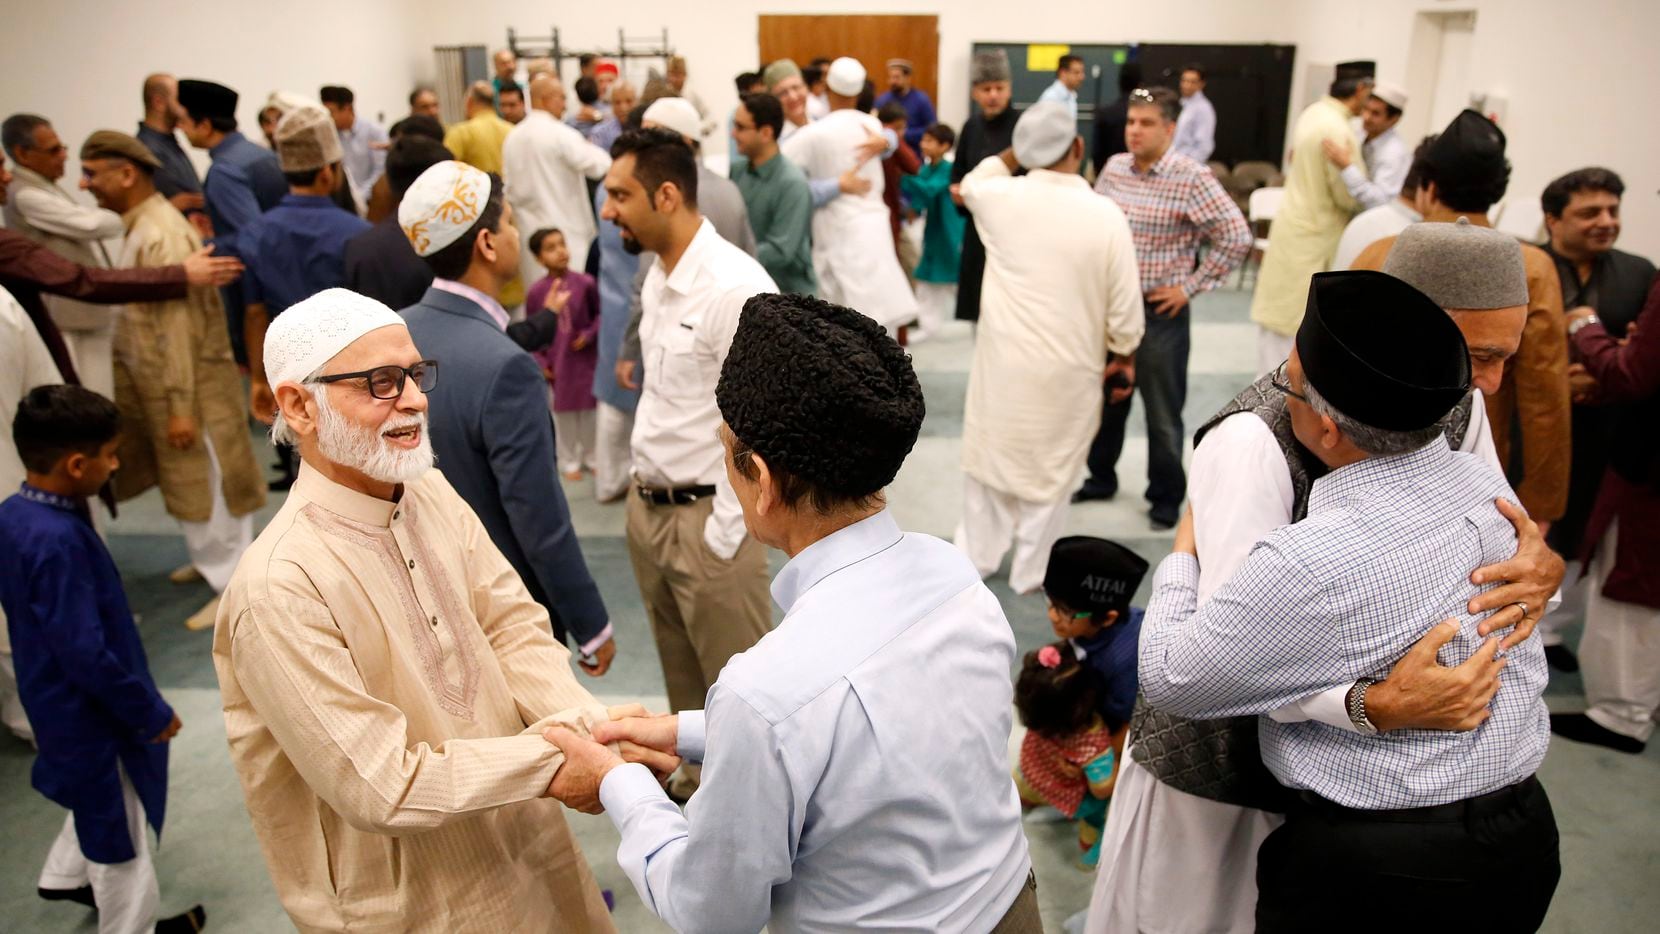 Expansion Of Allen Mosque Will Help Make Room For Collins Booming